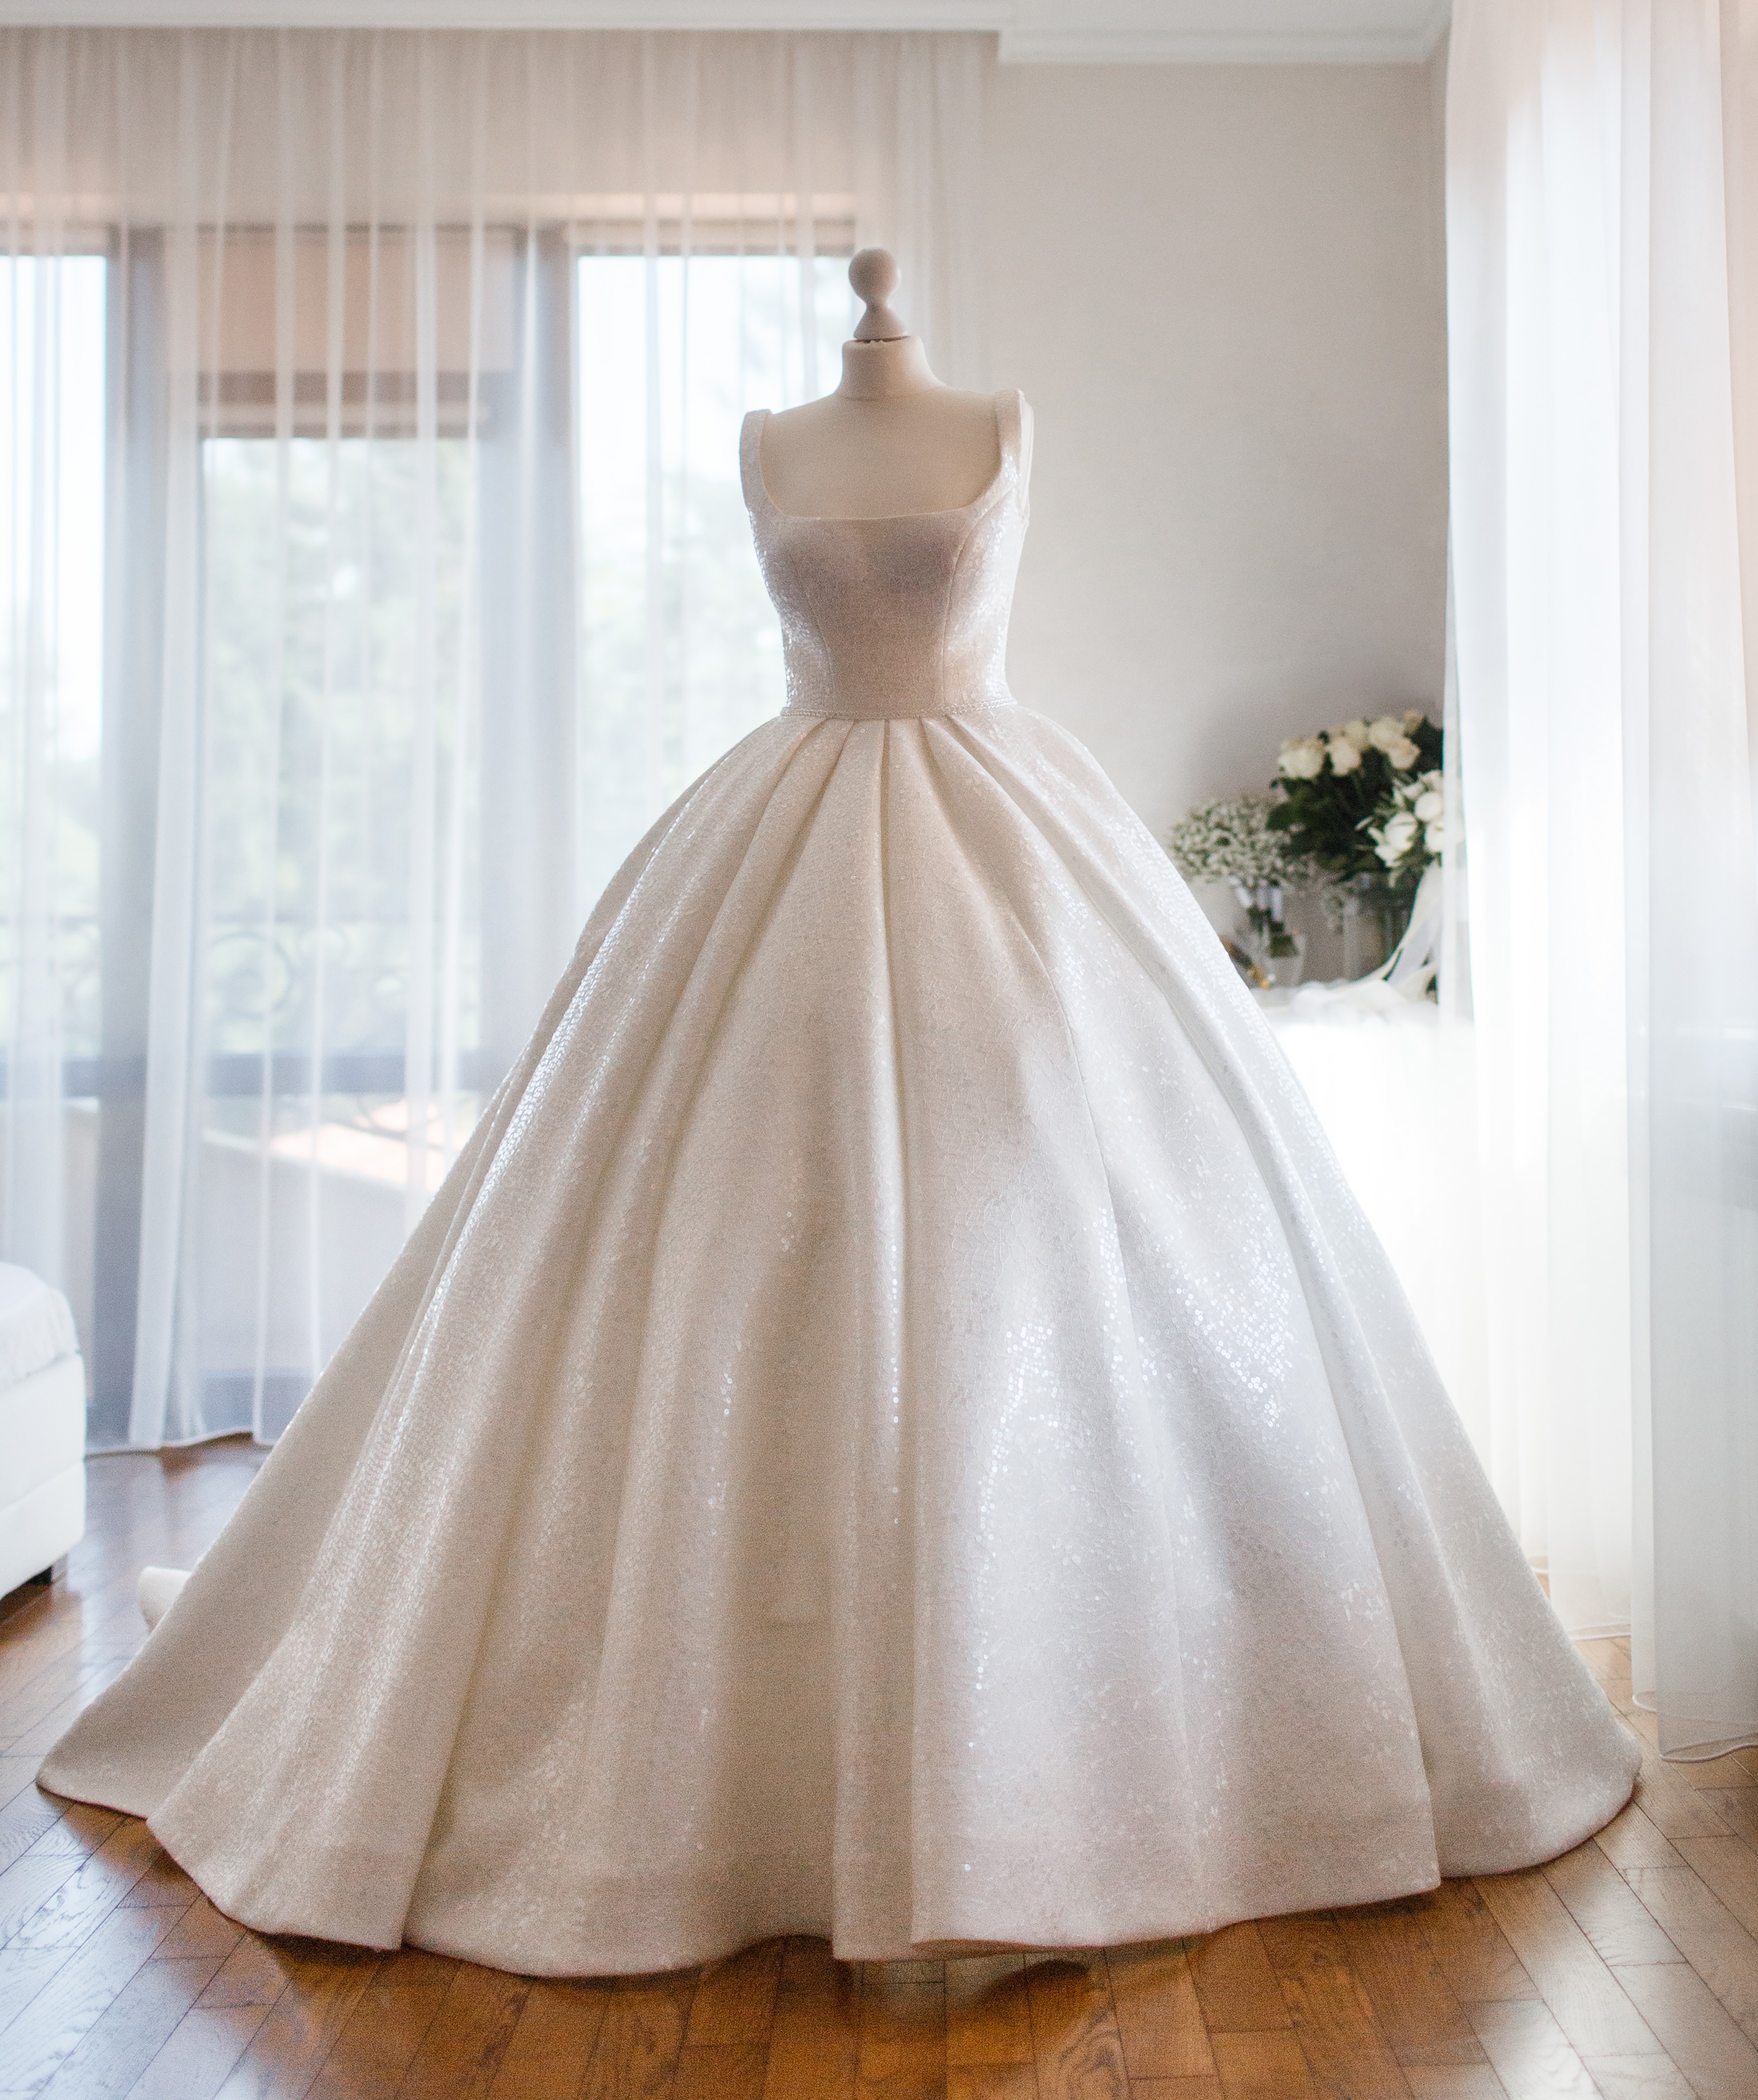 Wedding dress on display | Source: Getty Images